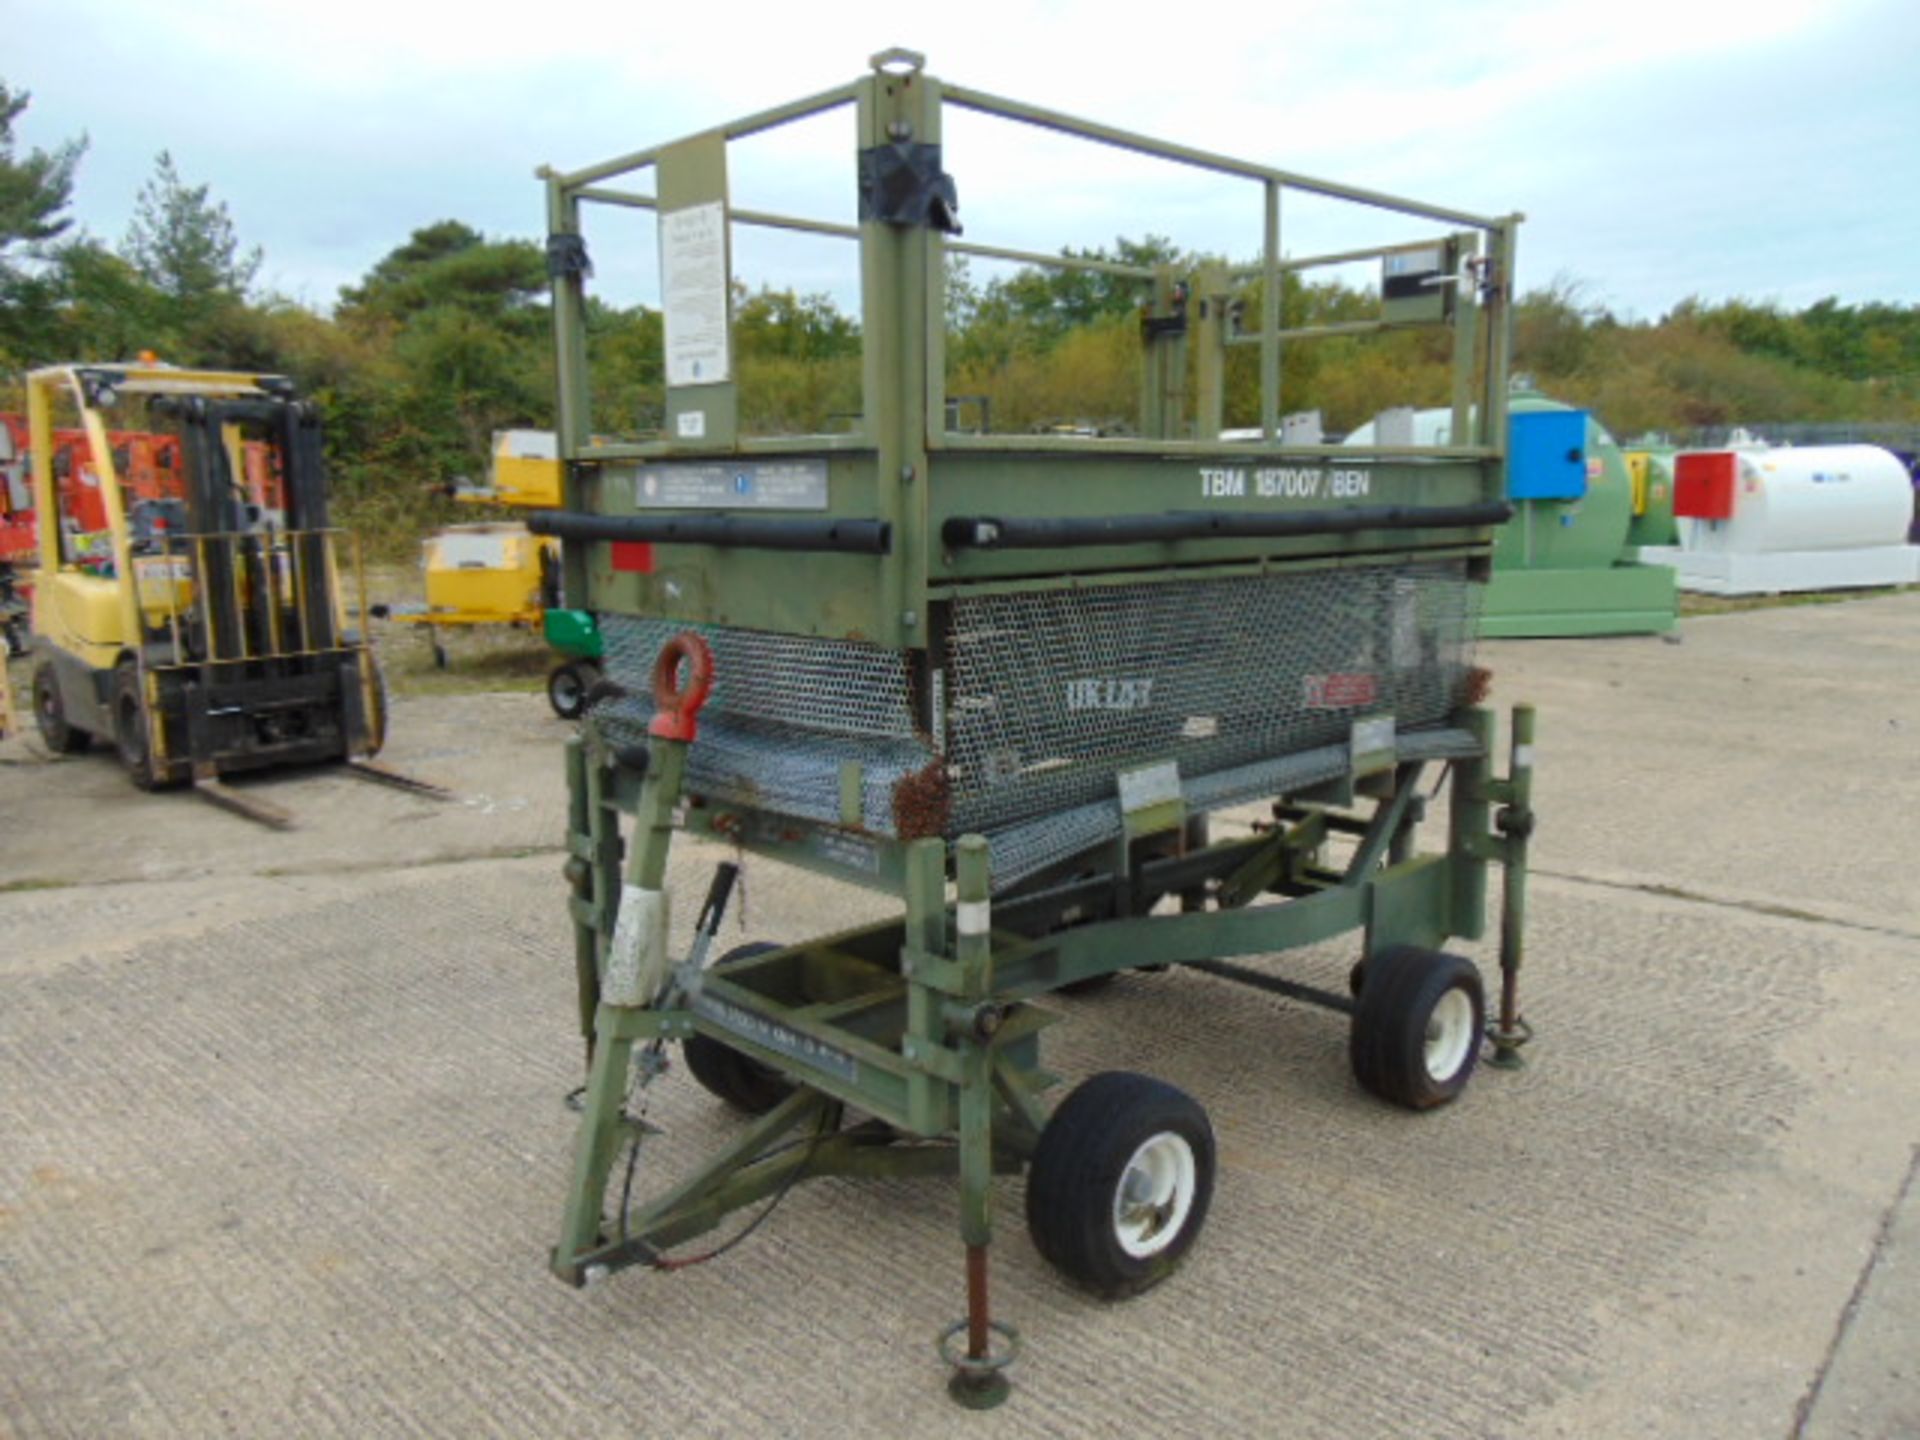 UK Lift Aircraft Hydraulic Access Platform from RAF as Shown - Image 3 of 11